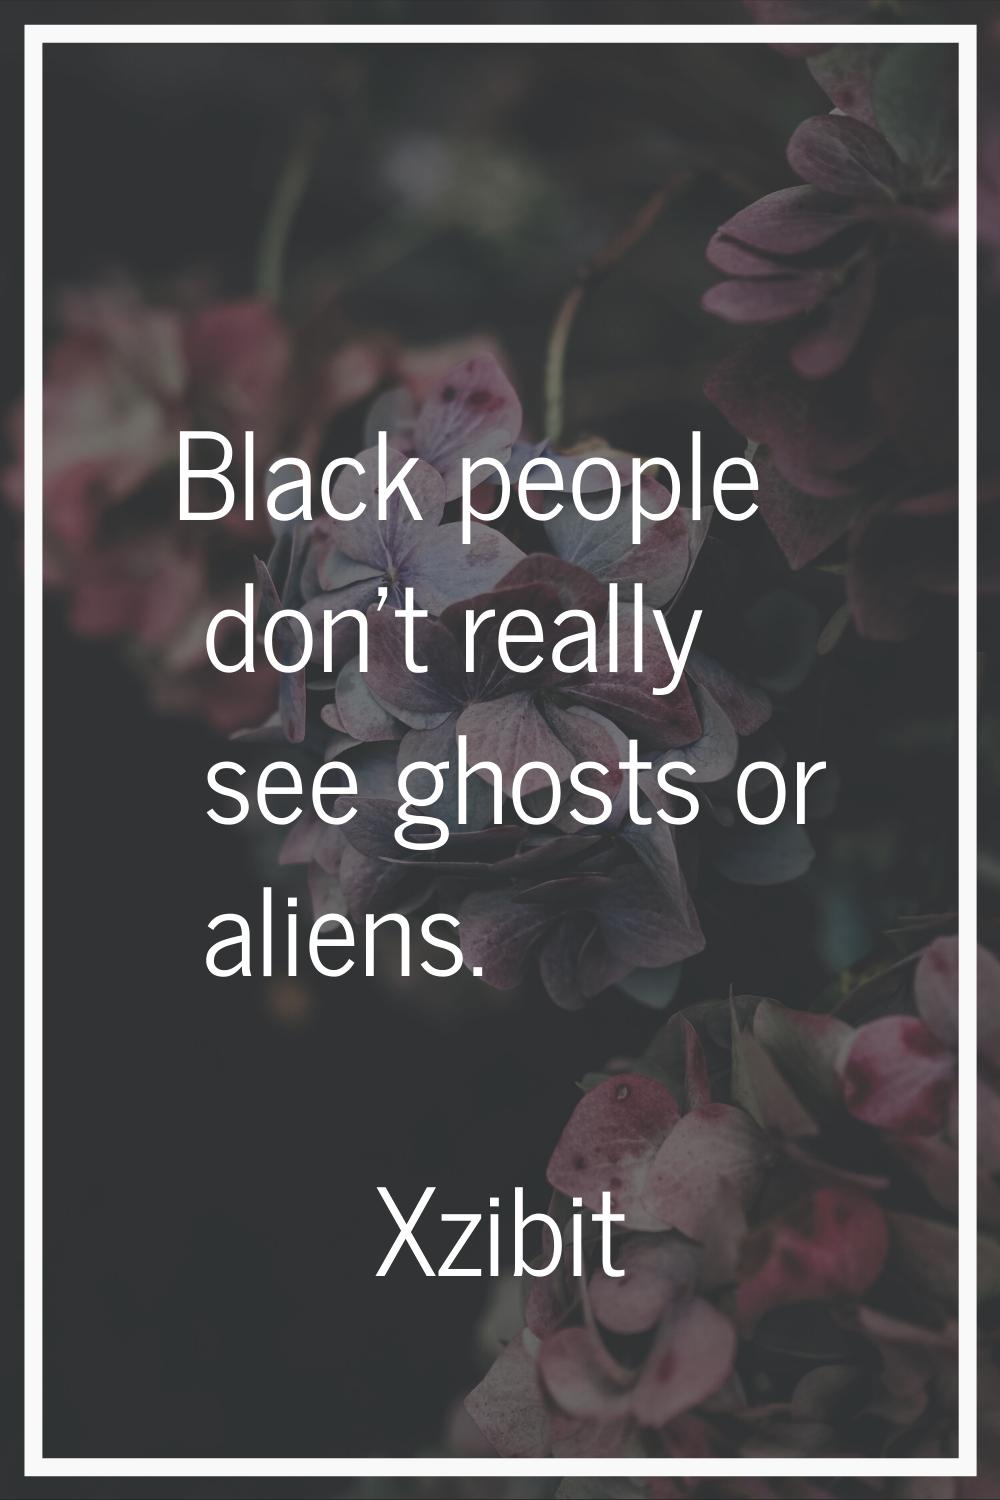 Black people don't really see ghosts or aliens.